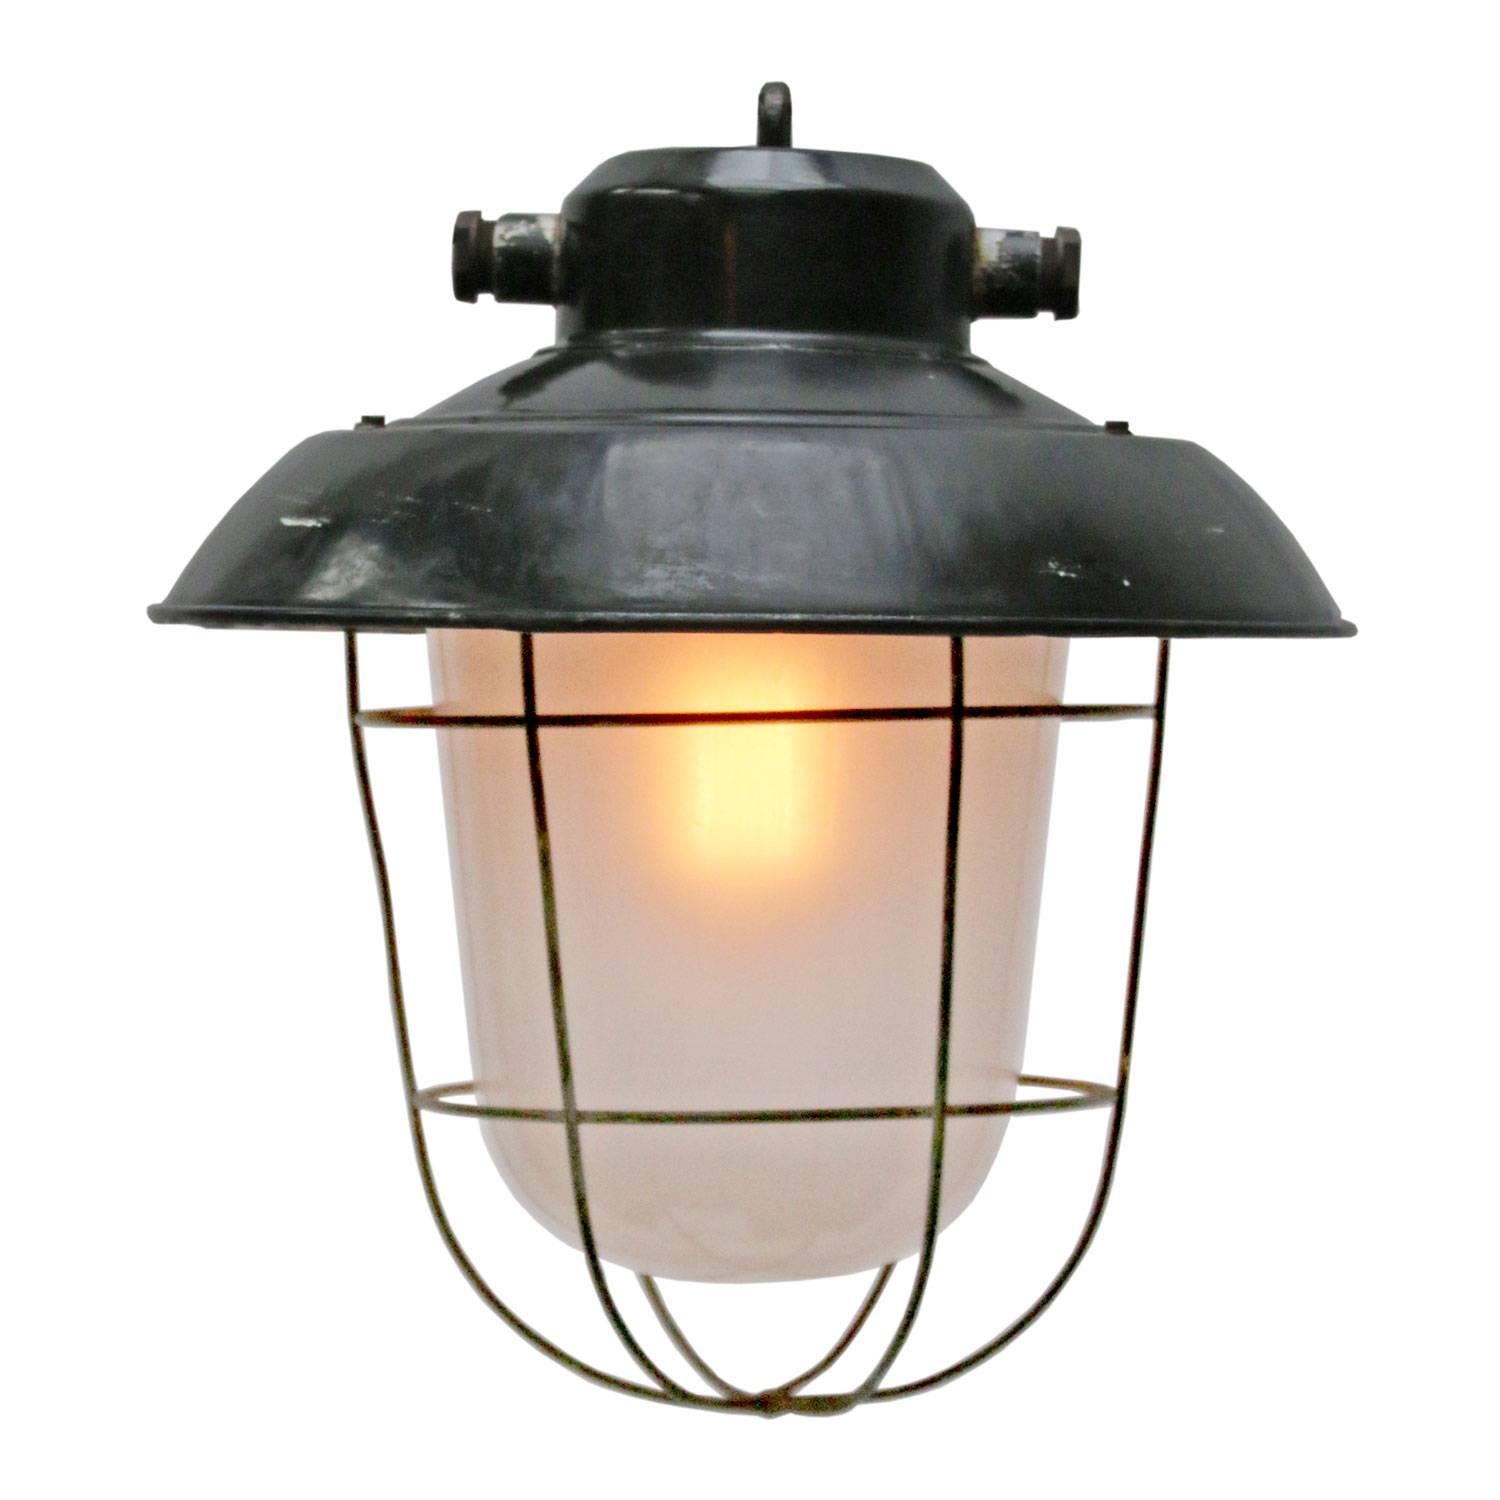 Black enamel Industrial lamp. Frosted glass.

Weight: 3.0 kg / 6.6 lb. For use outdoors as well as indoors. 

All lamps have been made suitable by international standards for incandescent light bulbs, energy-efficient and LED bulbs. E26/E27 bulb